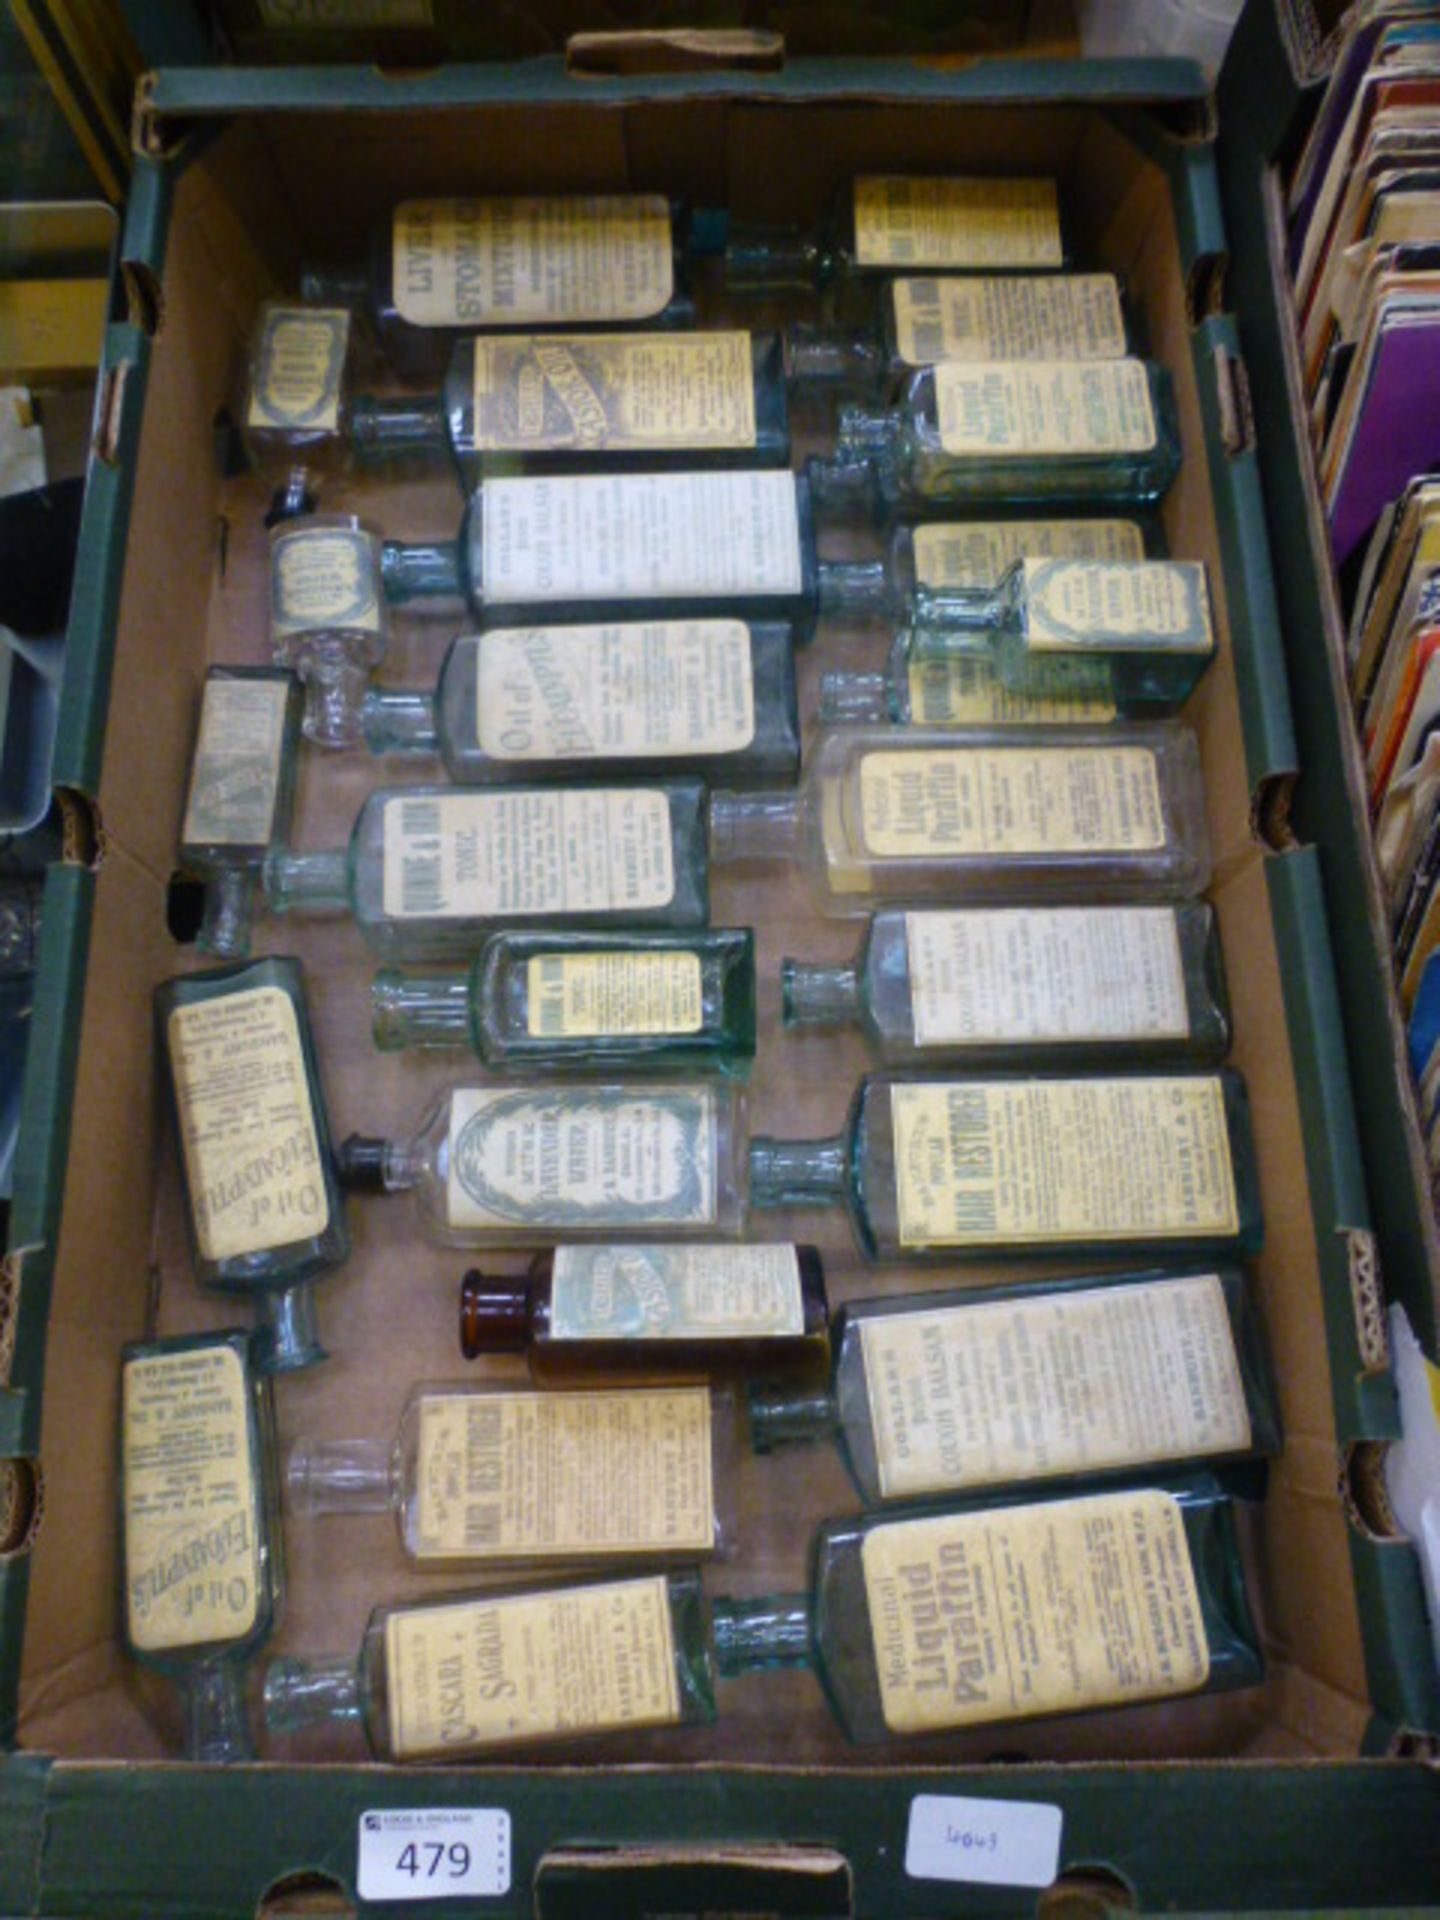 A tray containing a quantity of old toni